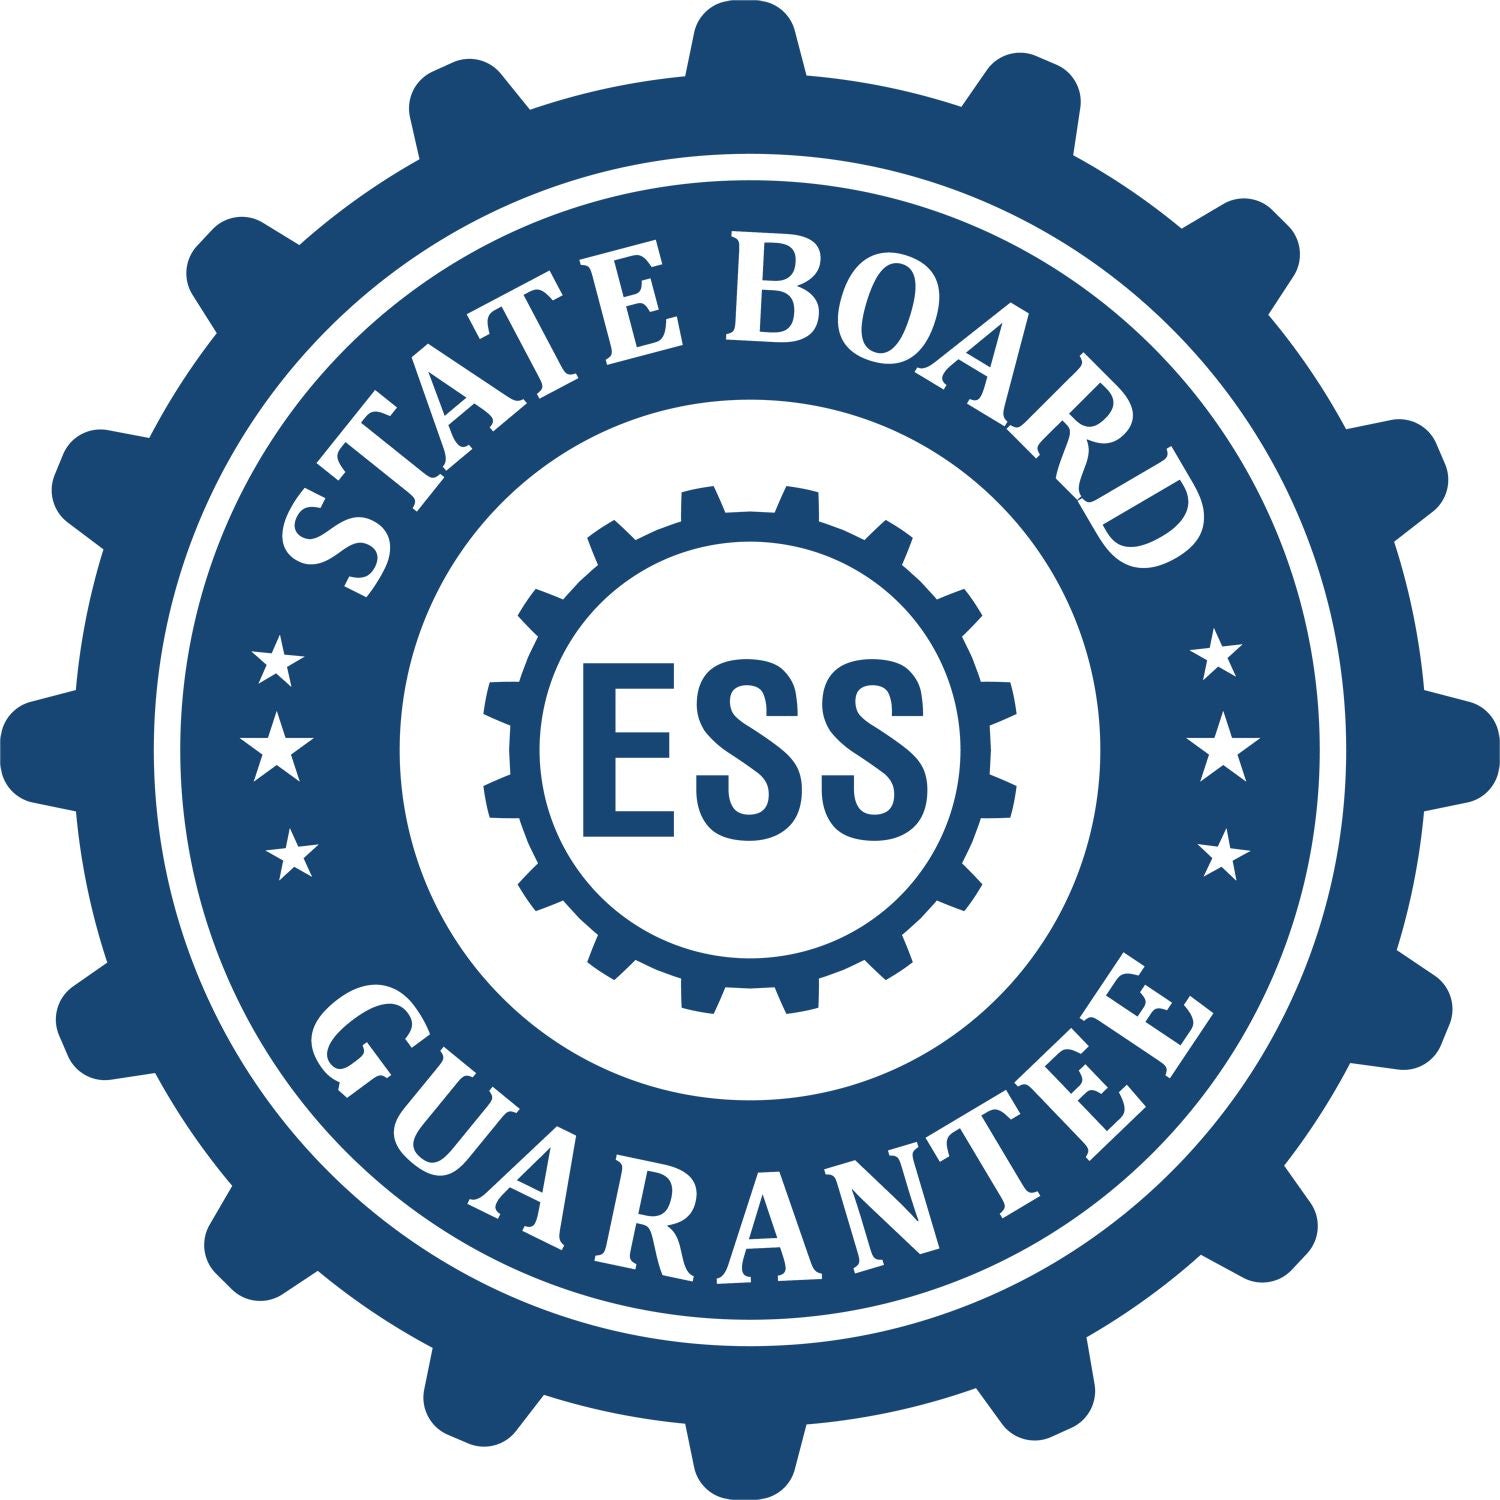 An emblem in a gear shape illustrating a state board guarantee for the Delaware Landscape Architectural Seal Stamp product.